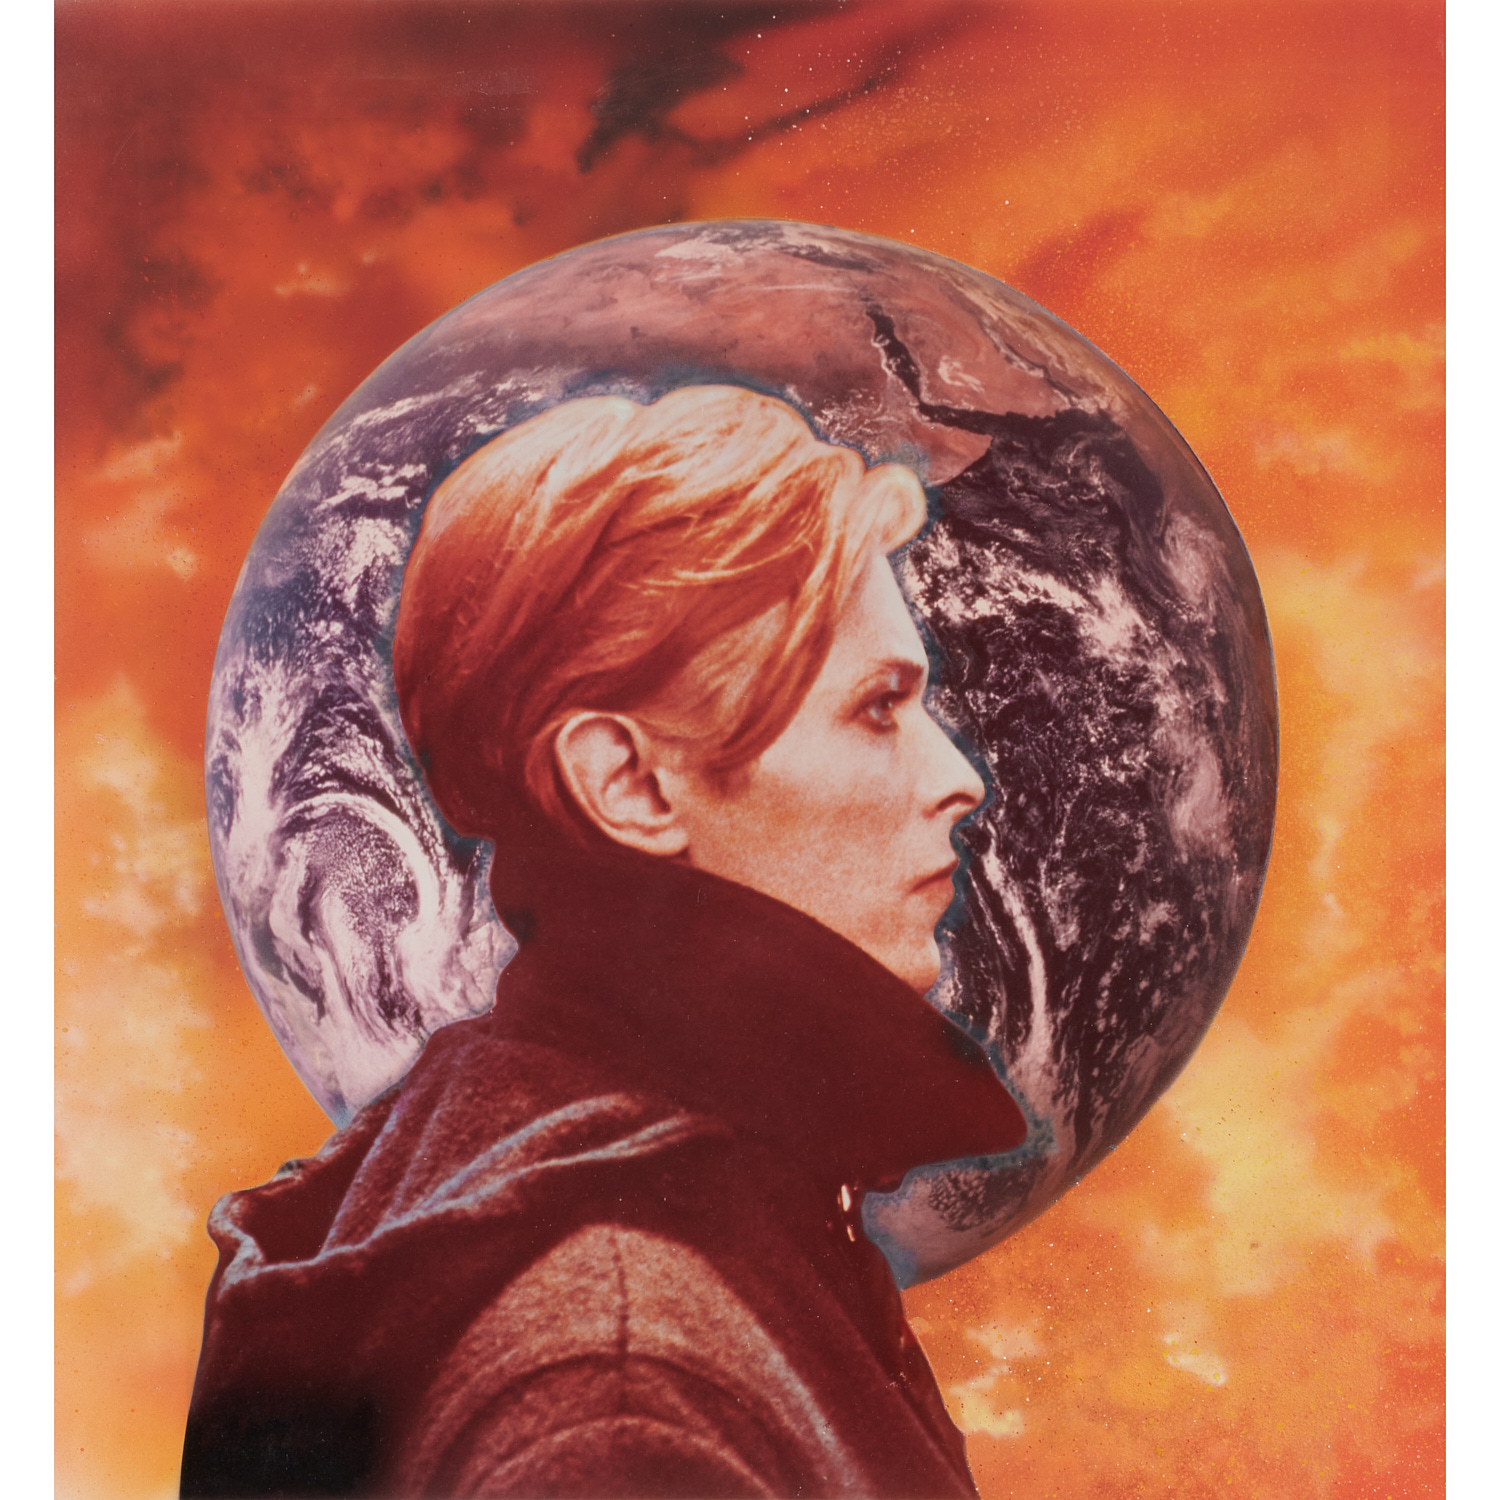 DAVID BOWIE, MAN WHO FELL TO EARTH